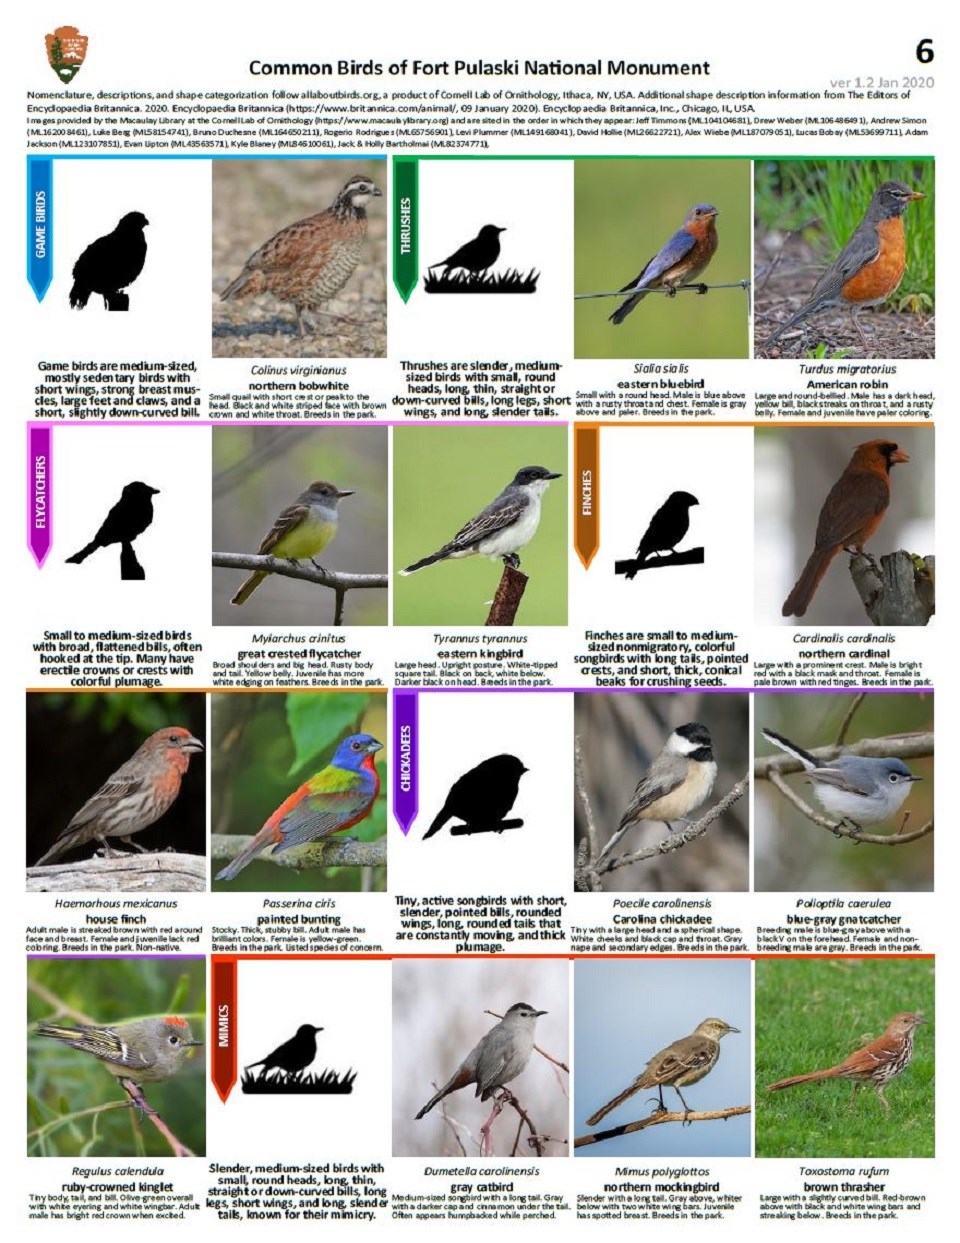 FOPU Bird ID Guide Page 6 - Game Birds, Thrushes, Flycatchers, Finches, Chickadees, and Mimics